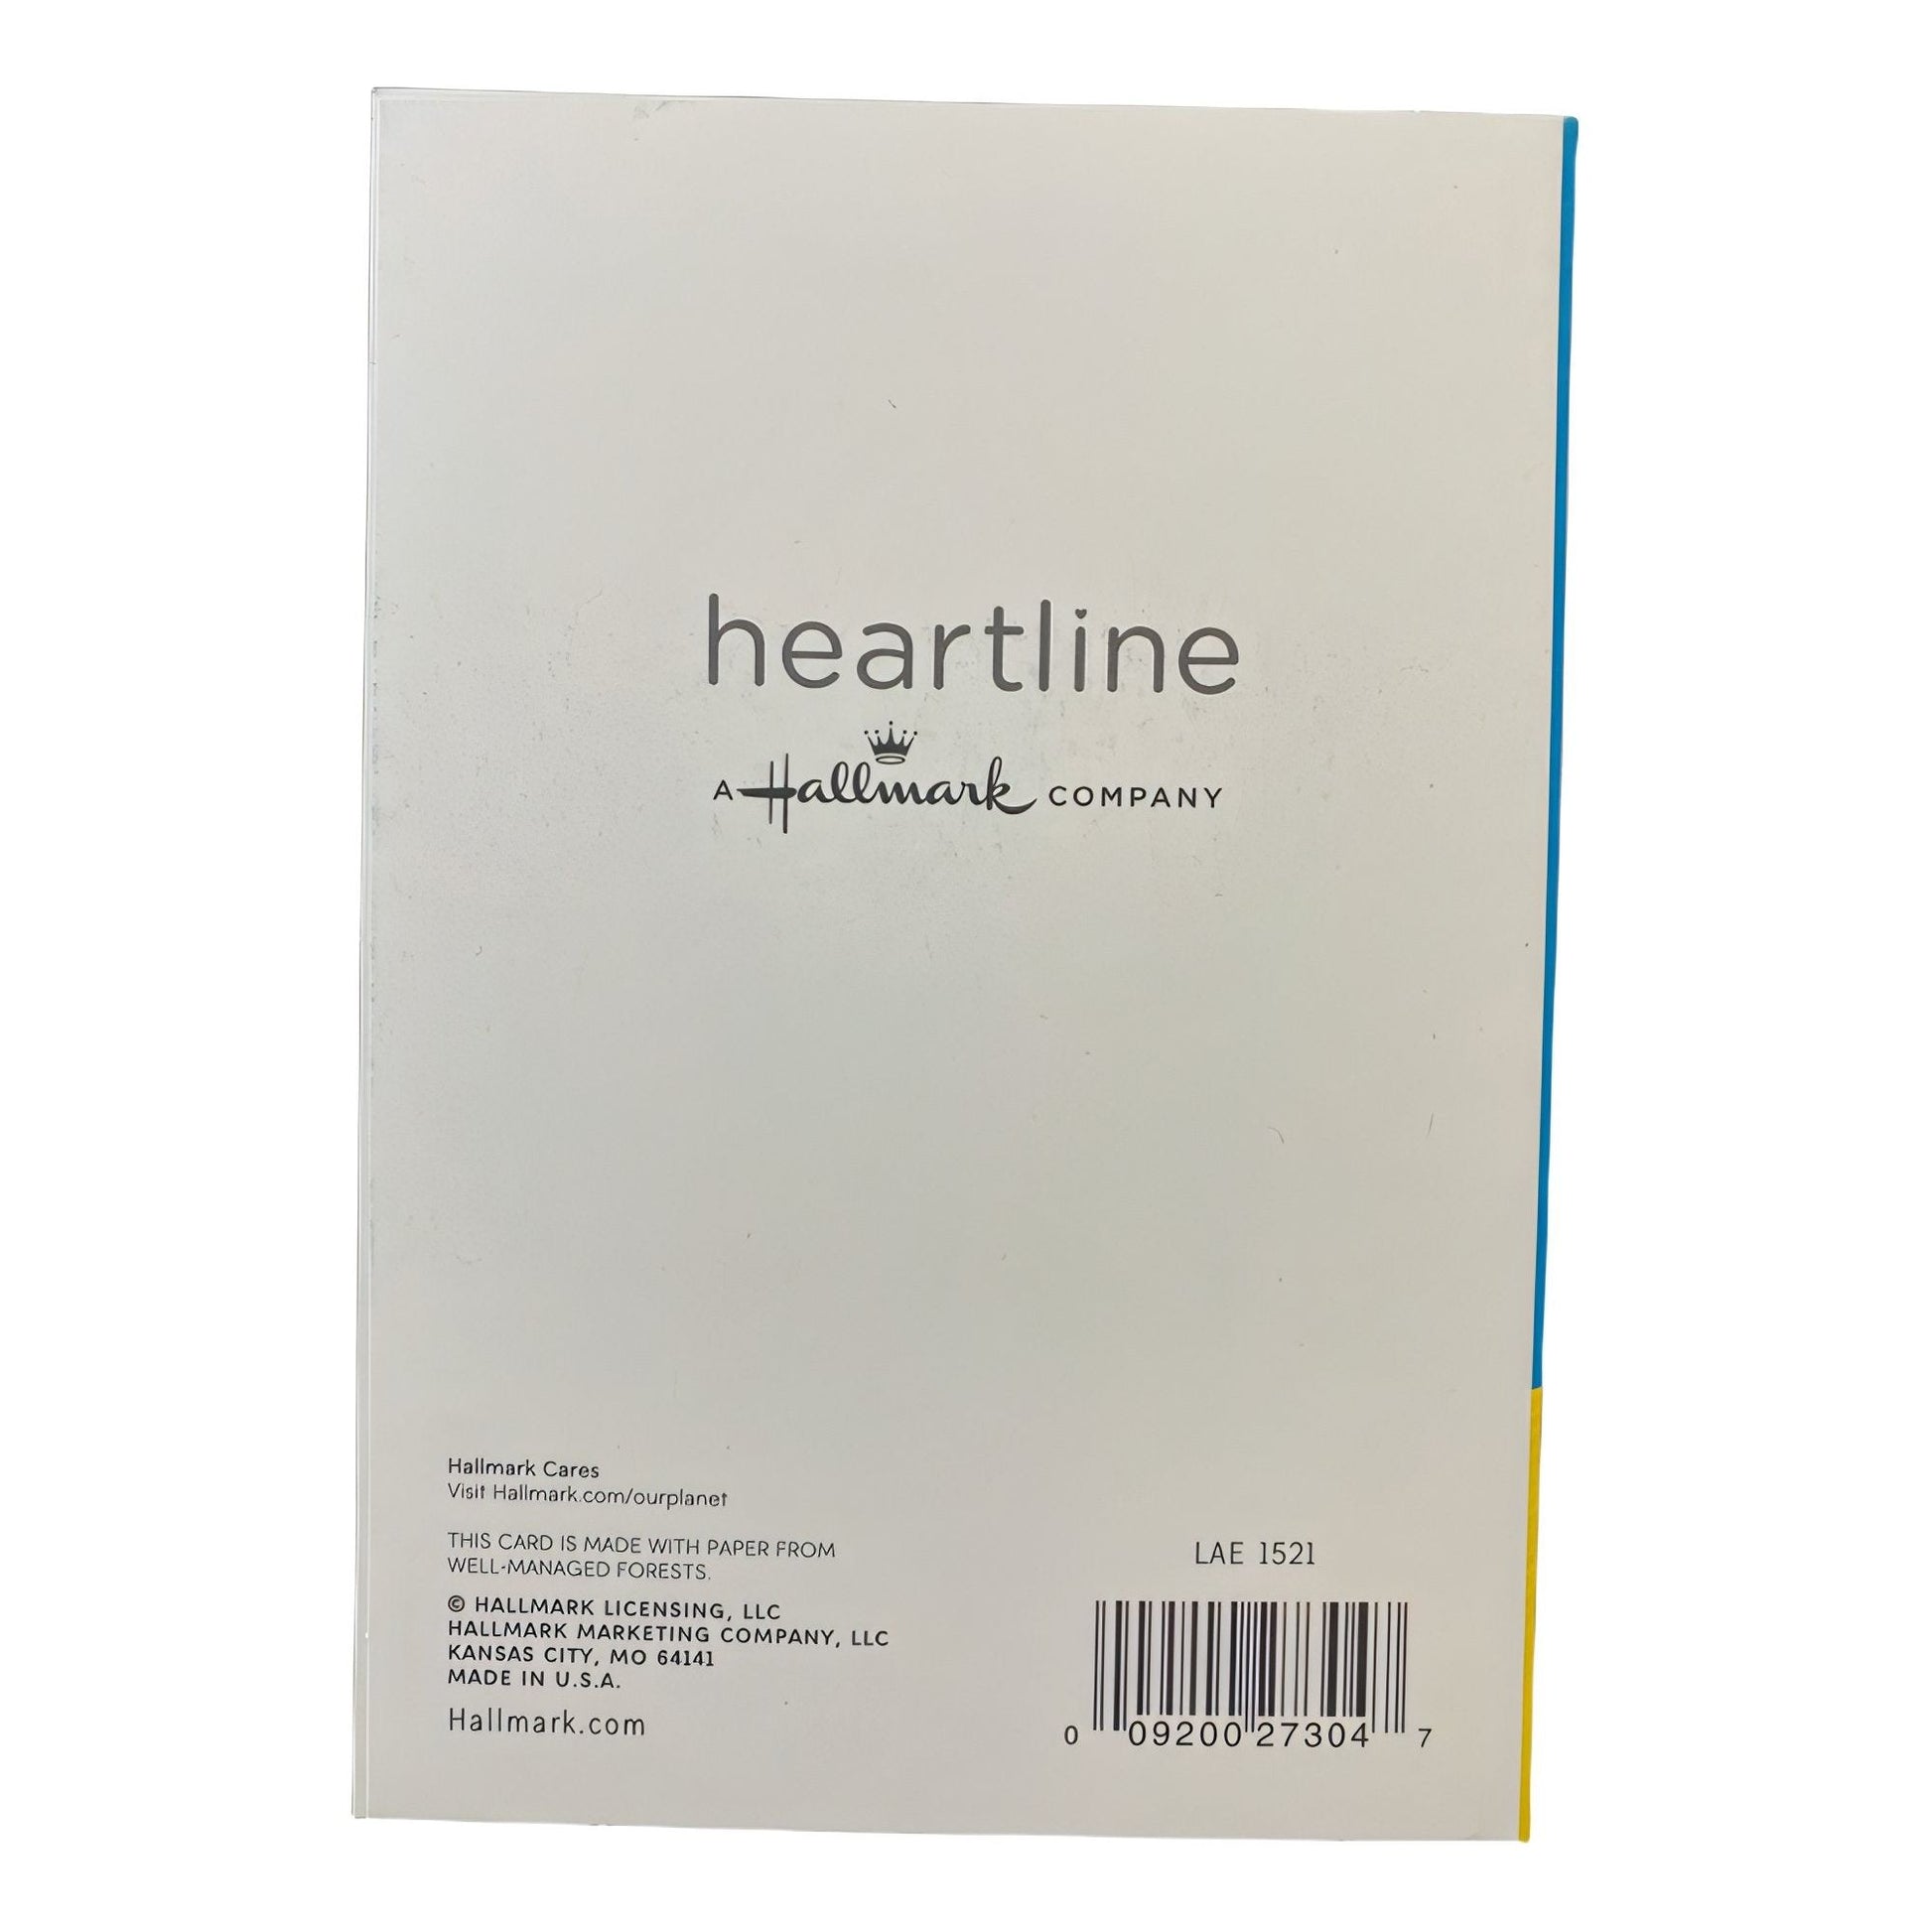 Hallmark-Birthday Card with Envelope - Heartline by Hallmark - "My Friends are a reflection of my good taste" - Brandat Outlet